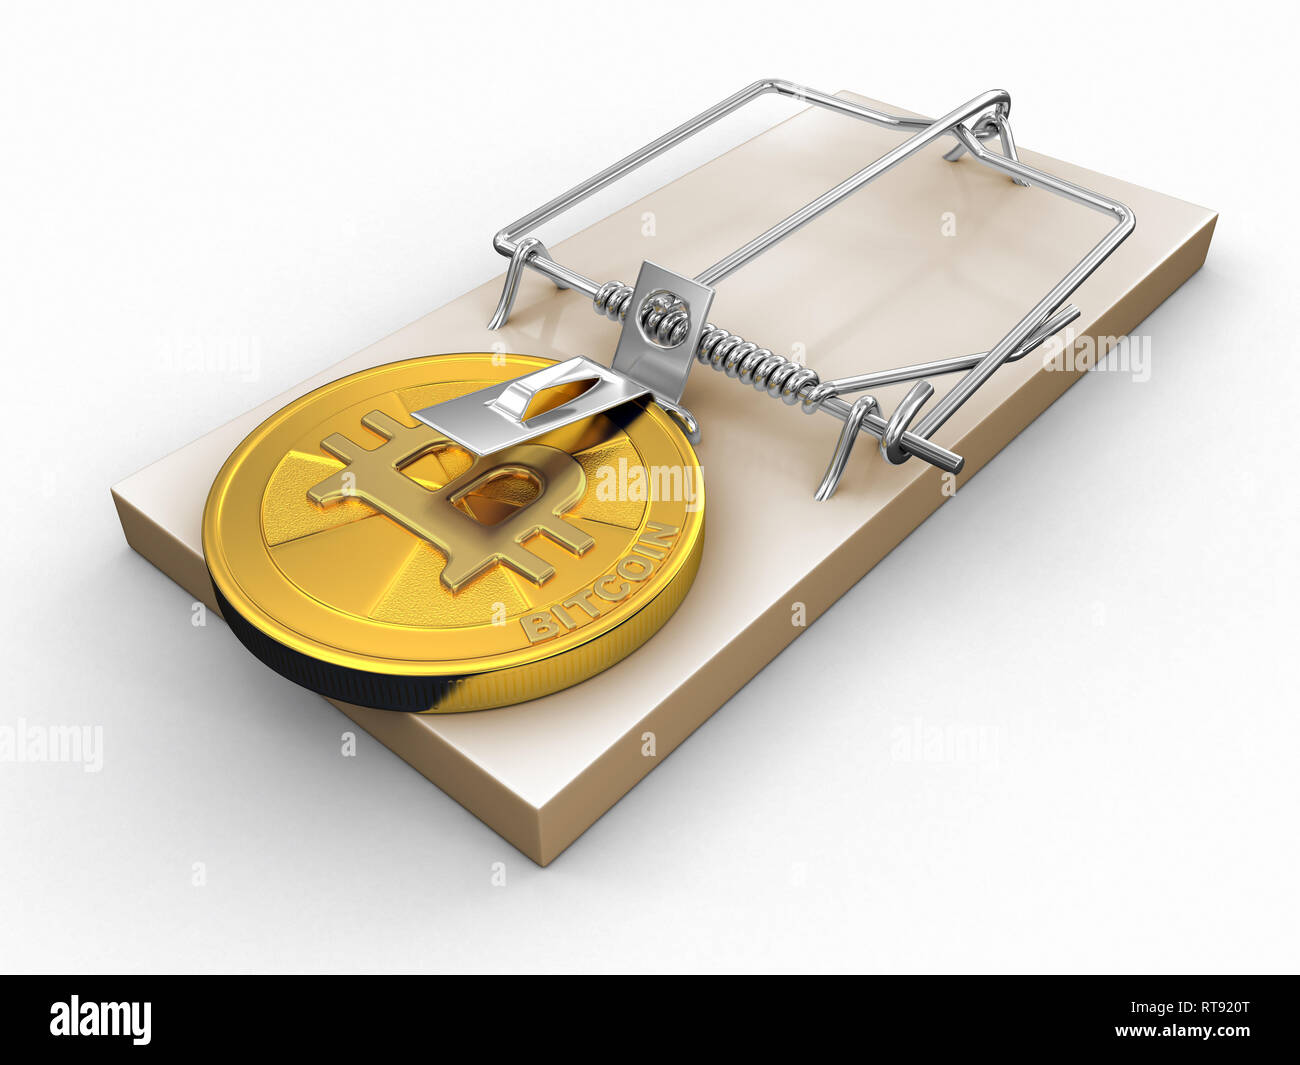 https://c8.alamy.com/comp/RT920T/mousetrap-and-bitcoin-image-with-clipping-path-RT920T.jpg